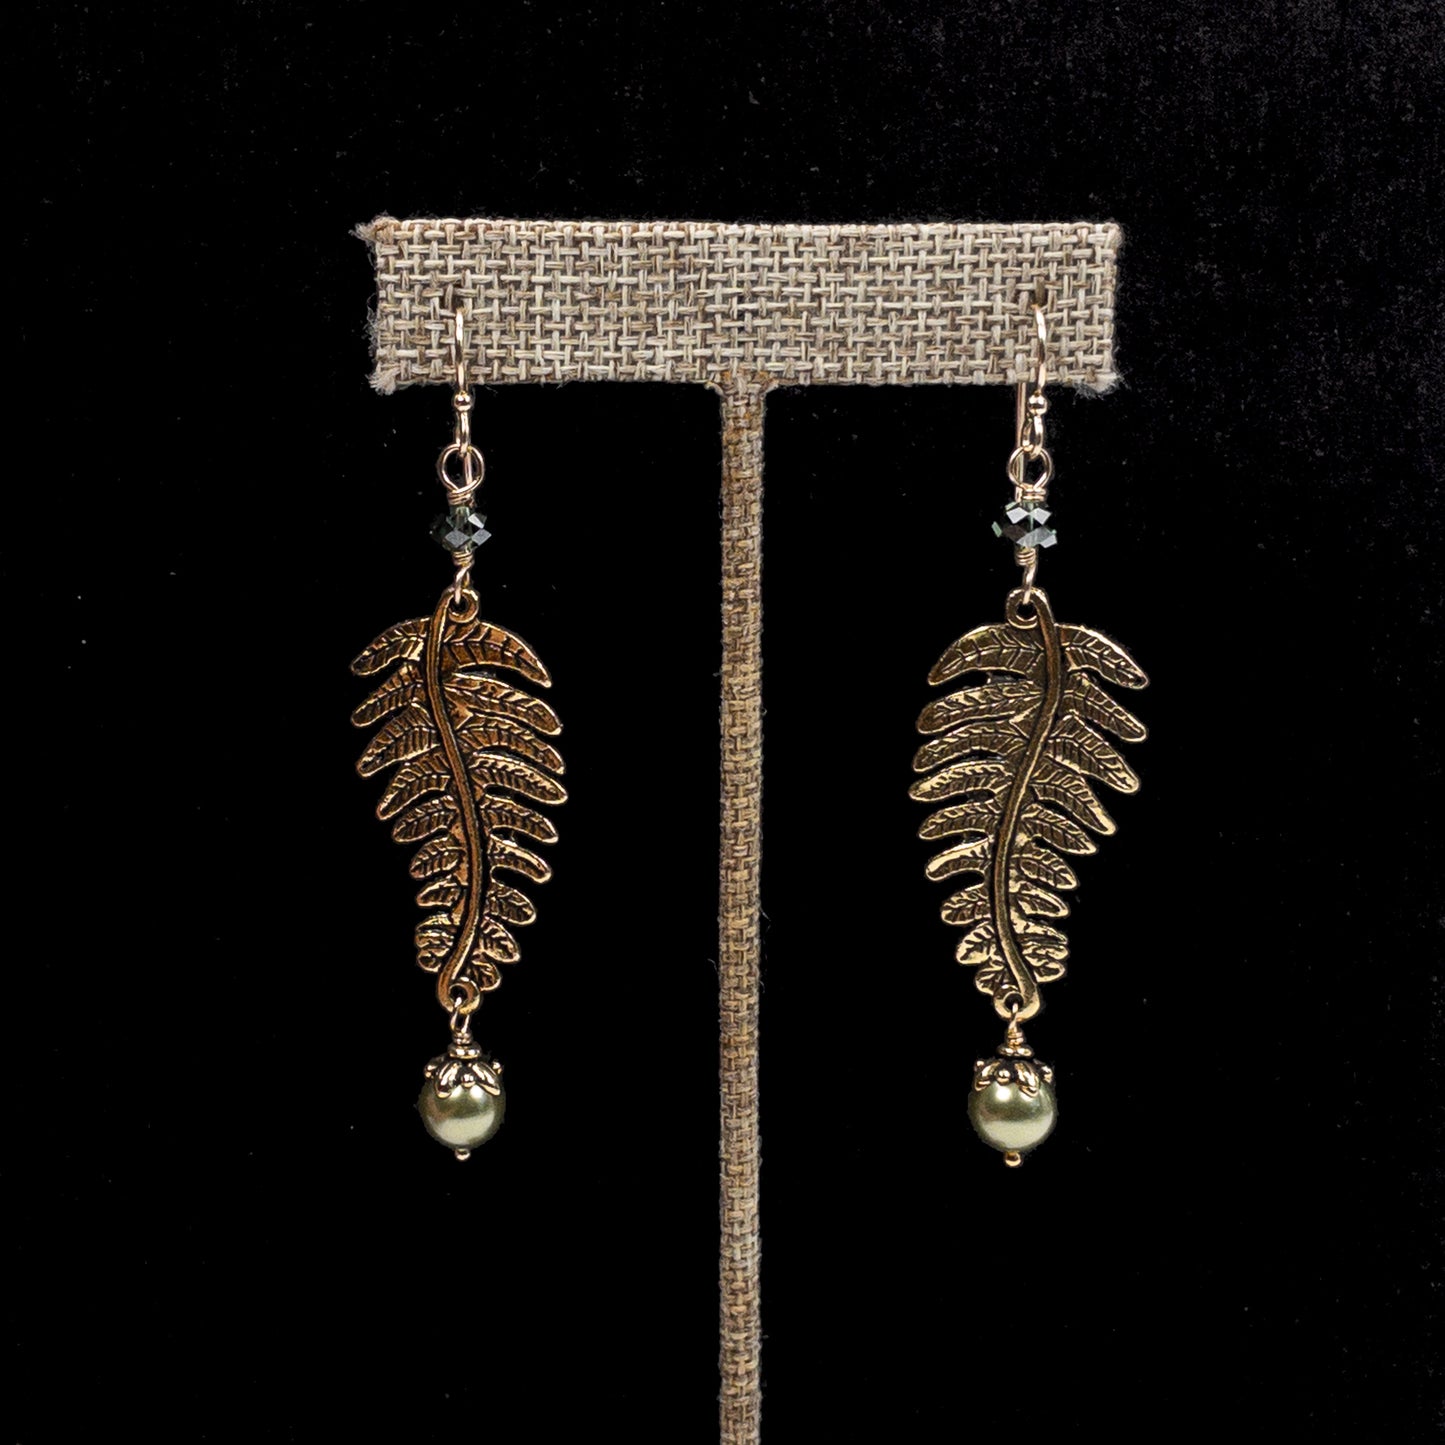 Fern Leaf Earring (3 Colors Available) - Kit or Finished Earrings